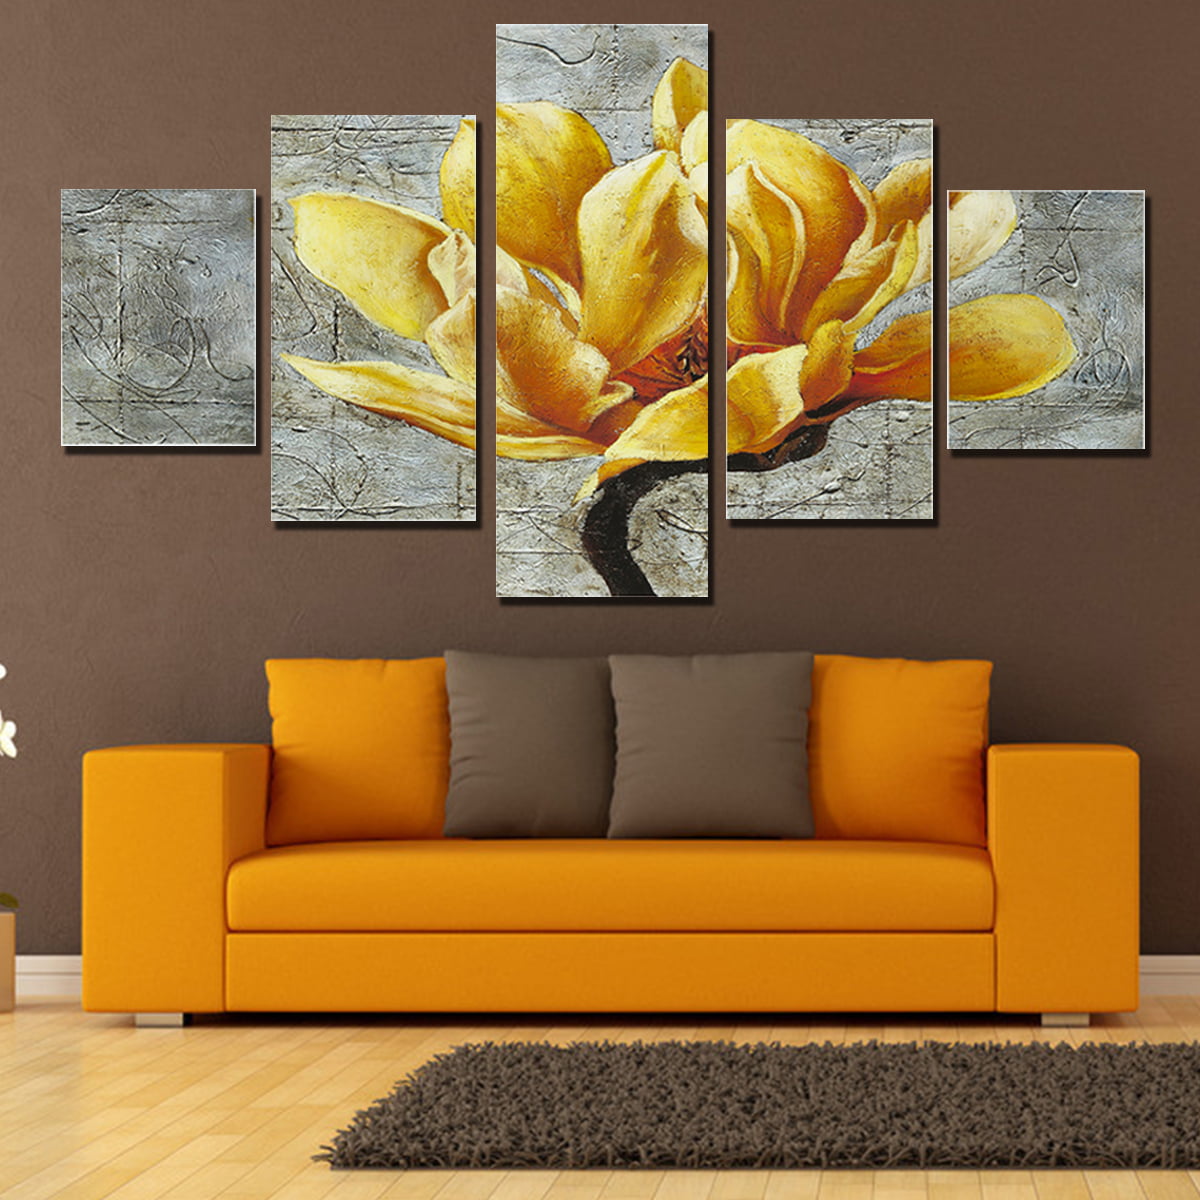 5PCS Unframed Modern Art Oil Paintings Print Canvas Picture Home Wall Decor 